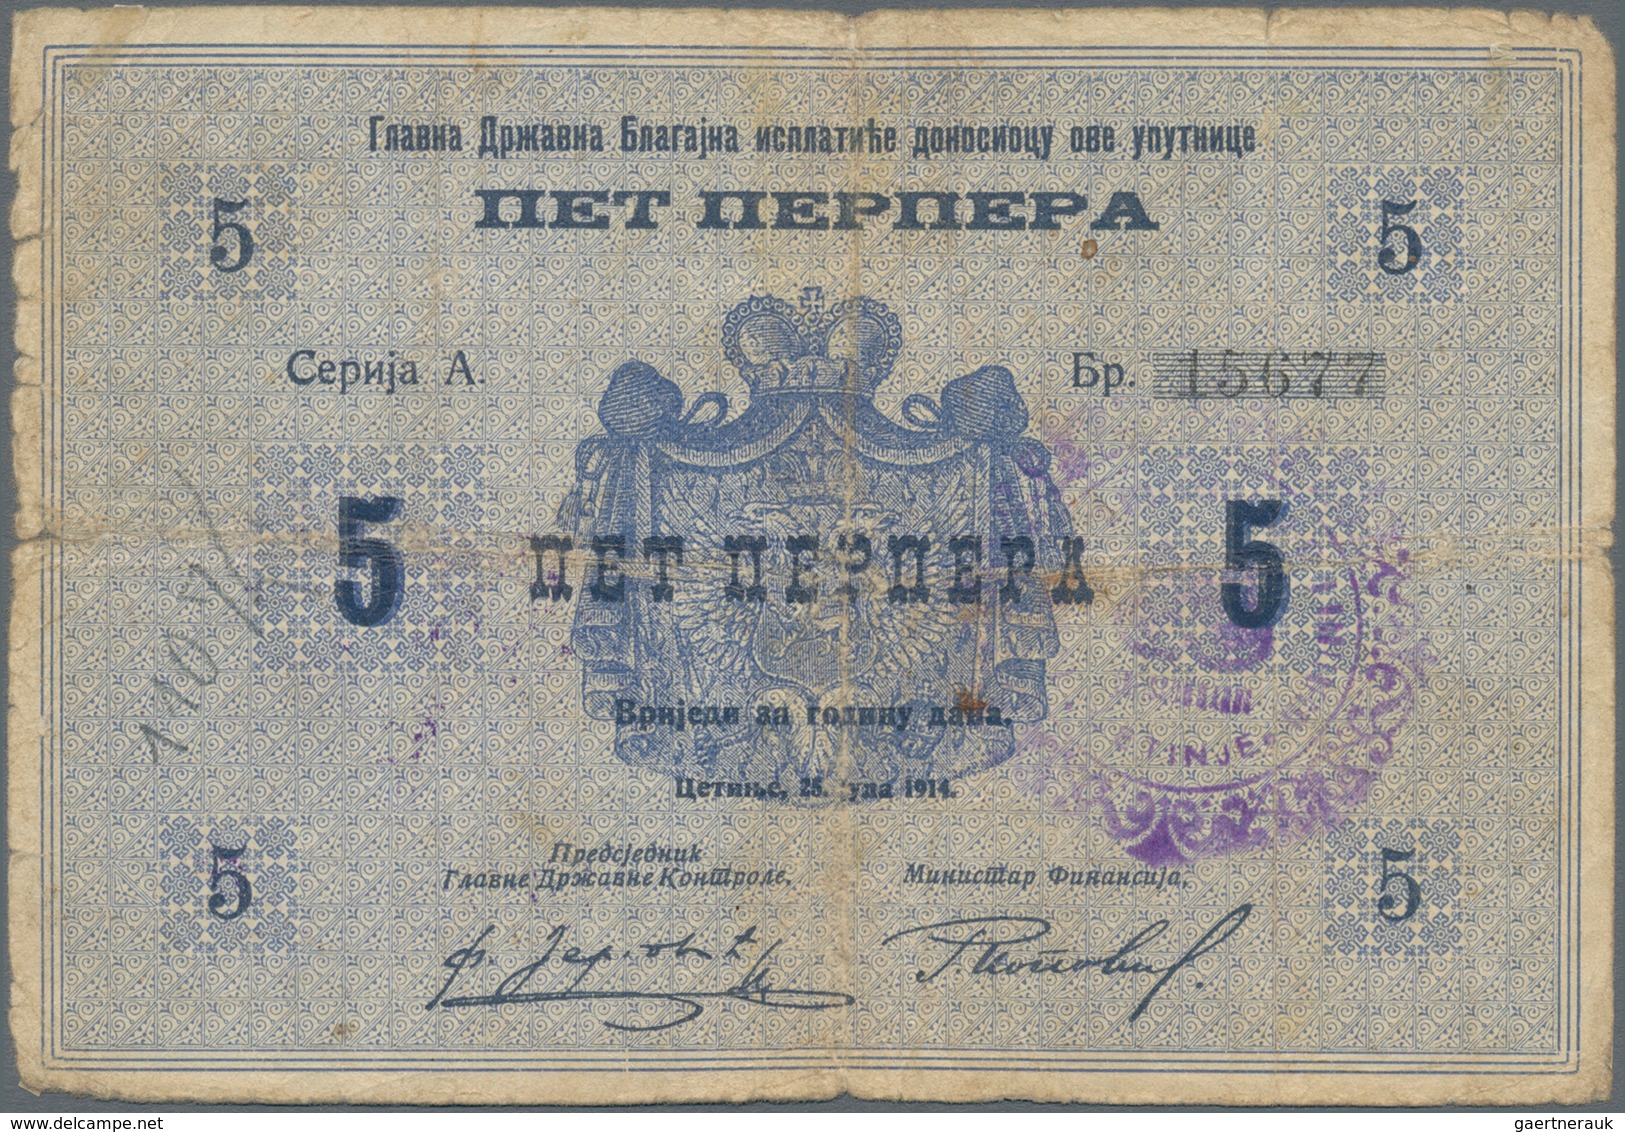 Montenegro: Military Government District Command set with 7 banknotes of the 1914 (1916) handstamped